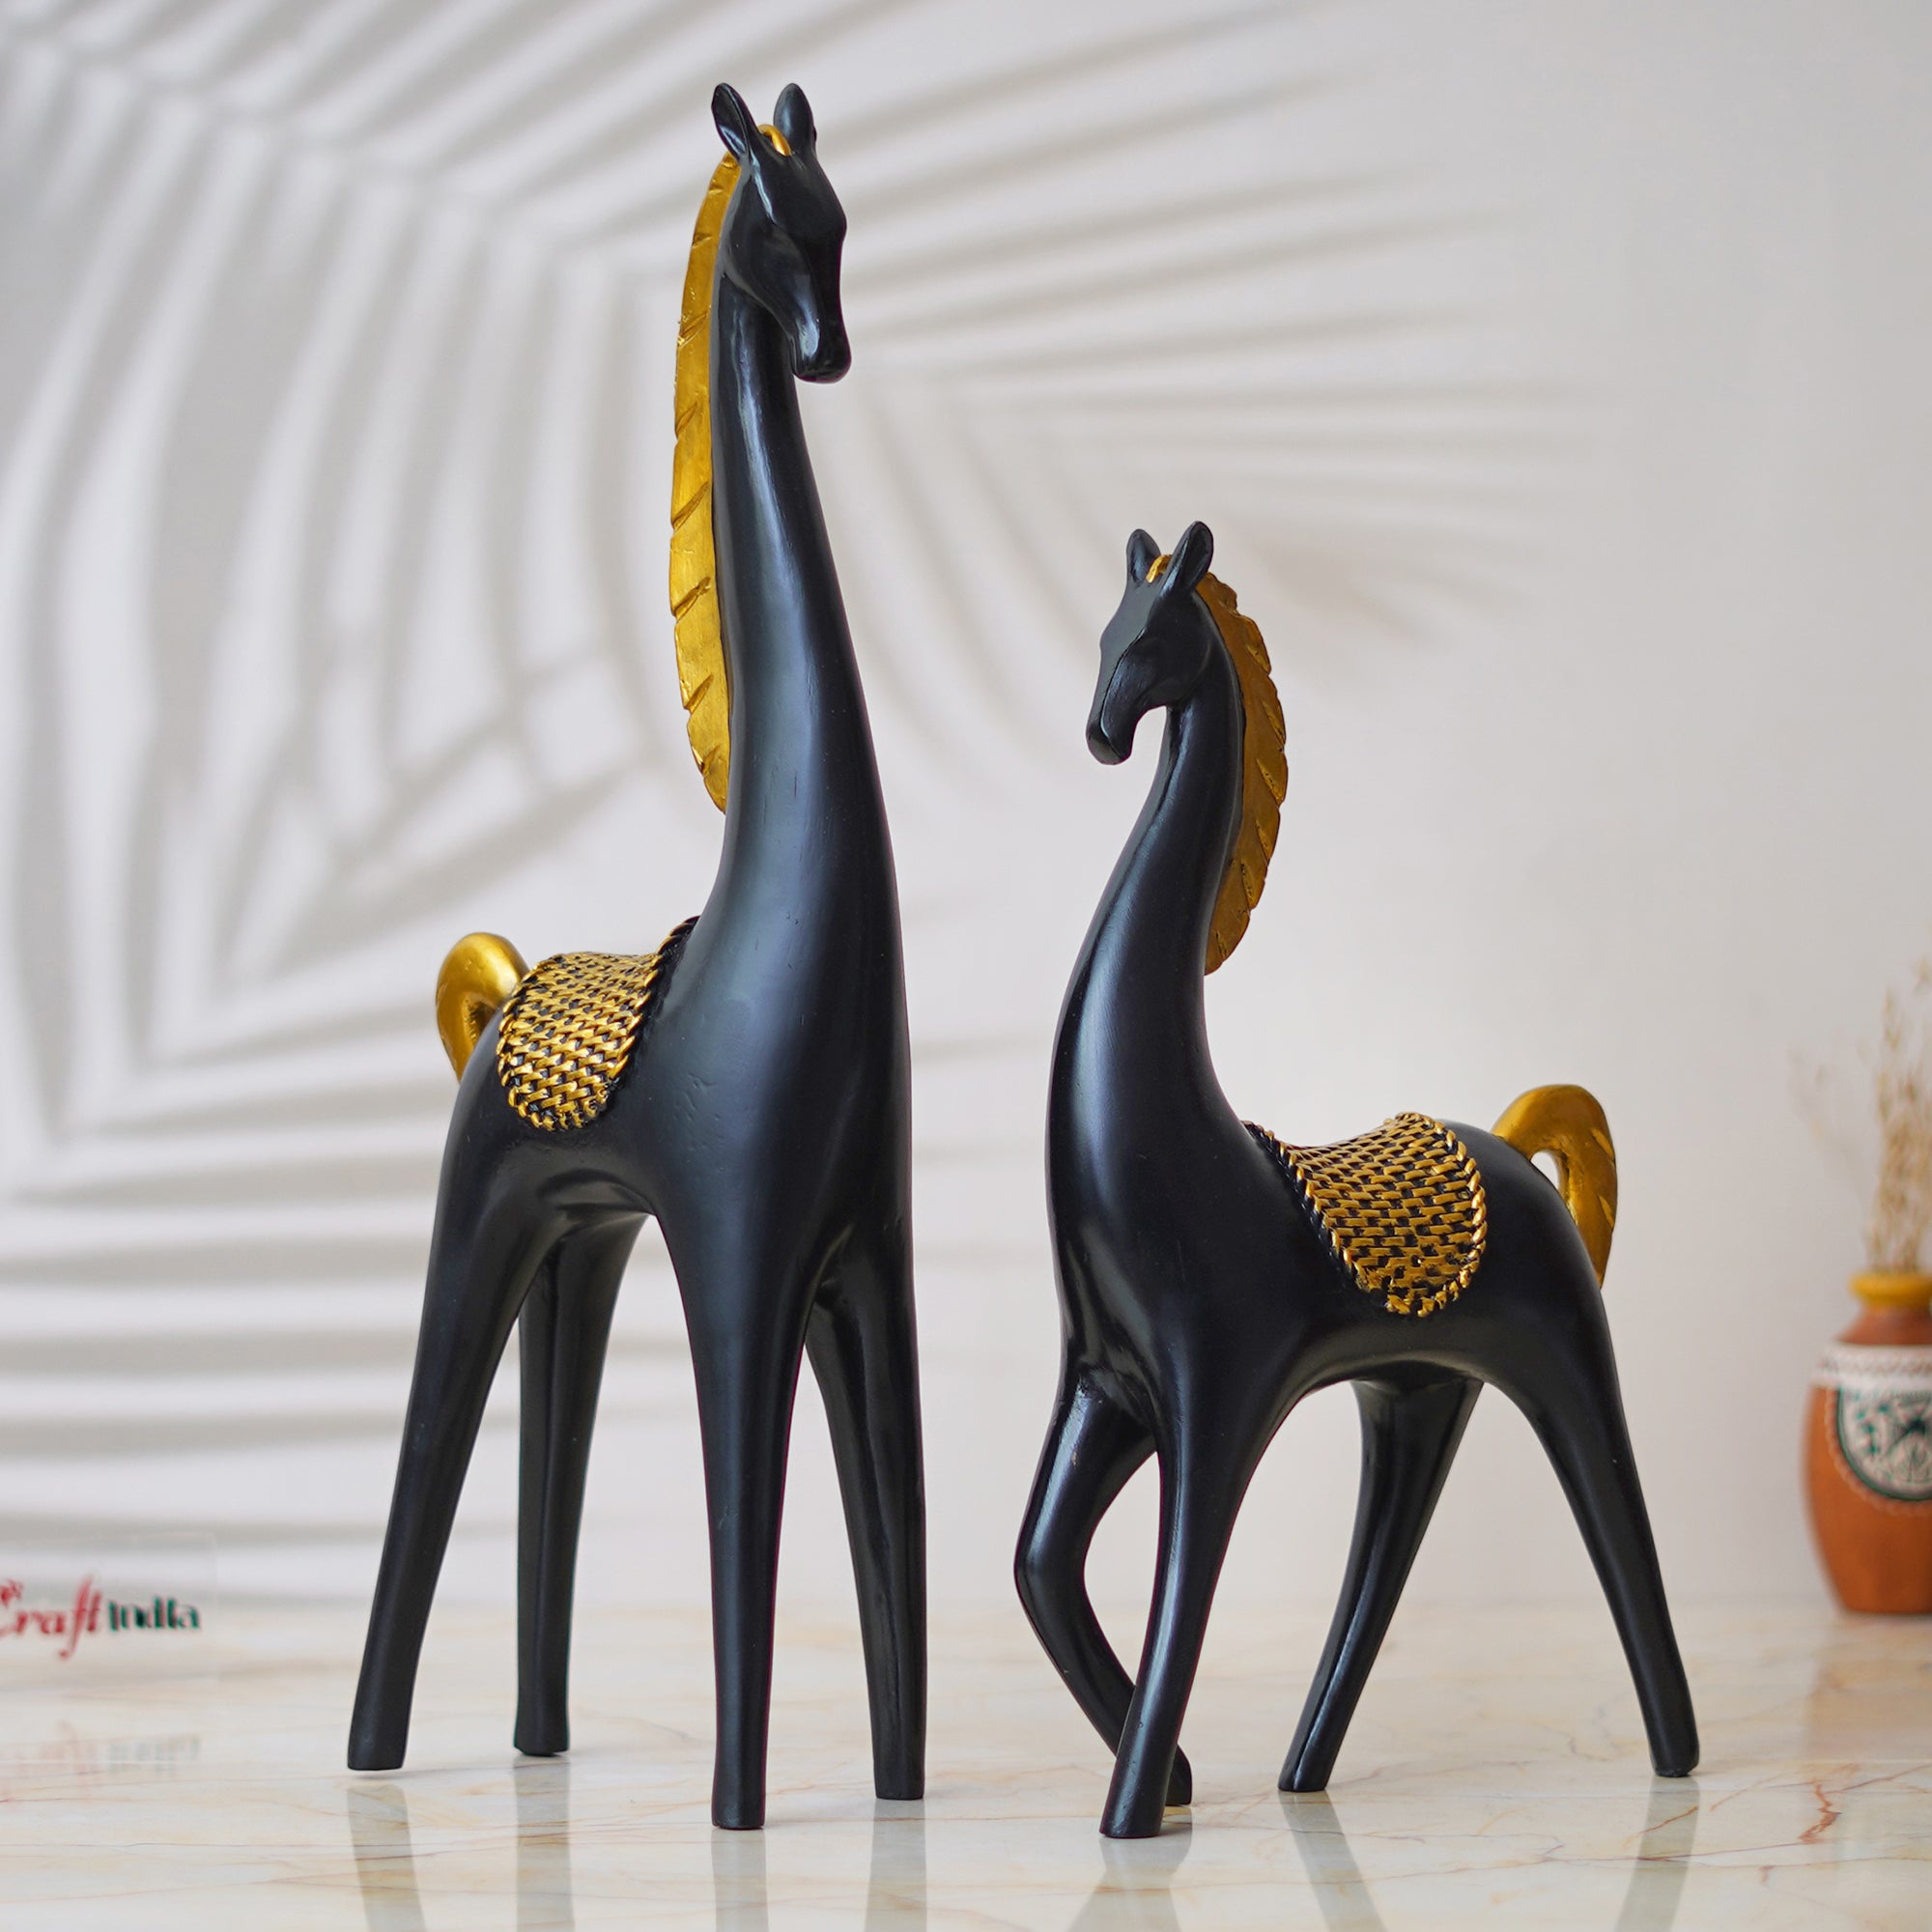 Set of 2 Black Horse Statues with Golden Hair Decorative Animal Figurines 4